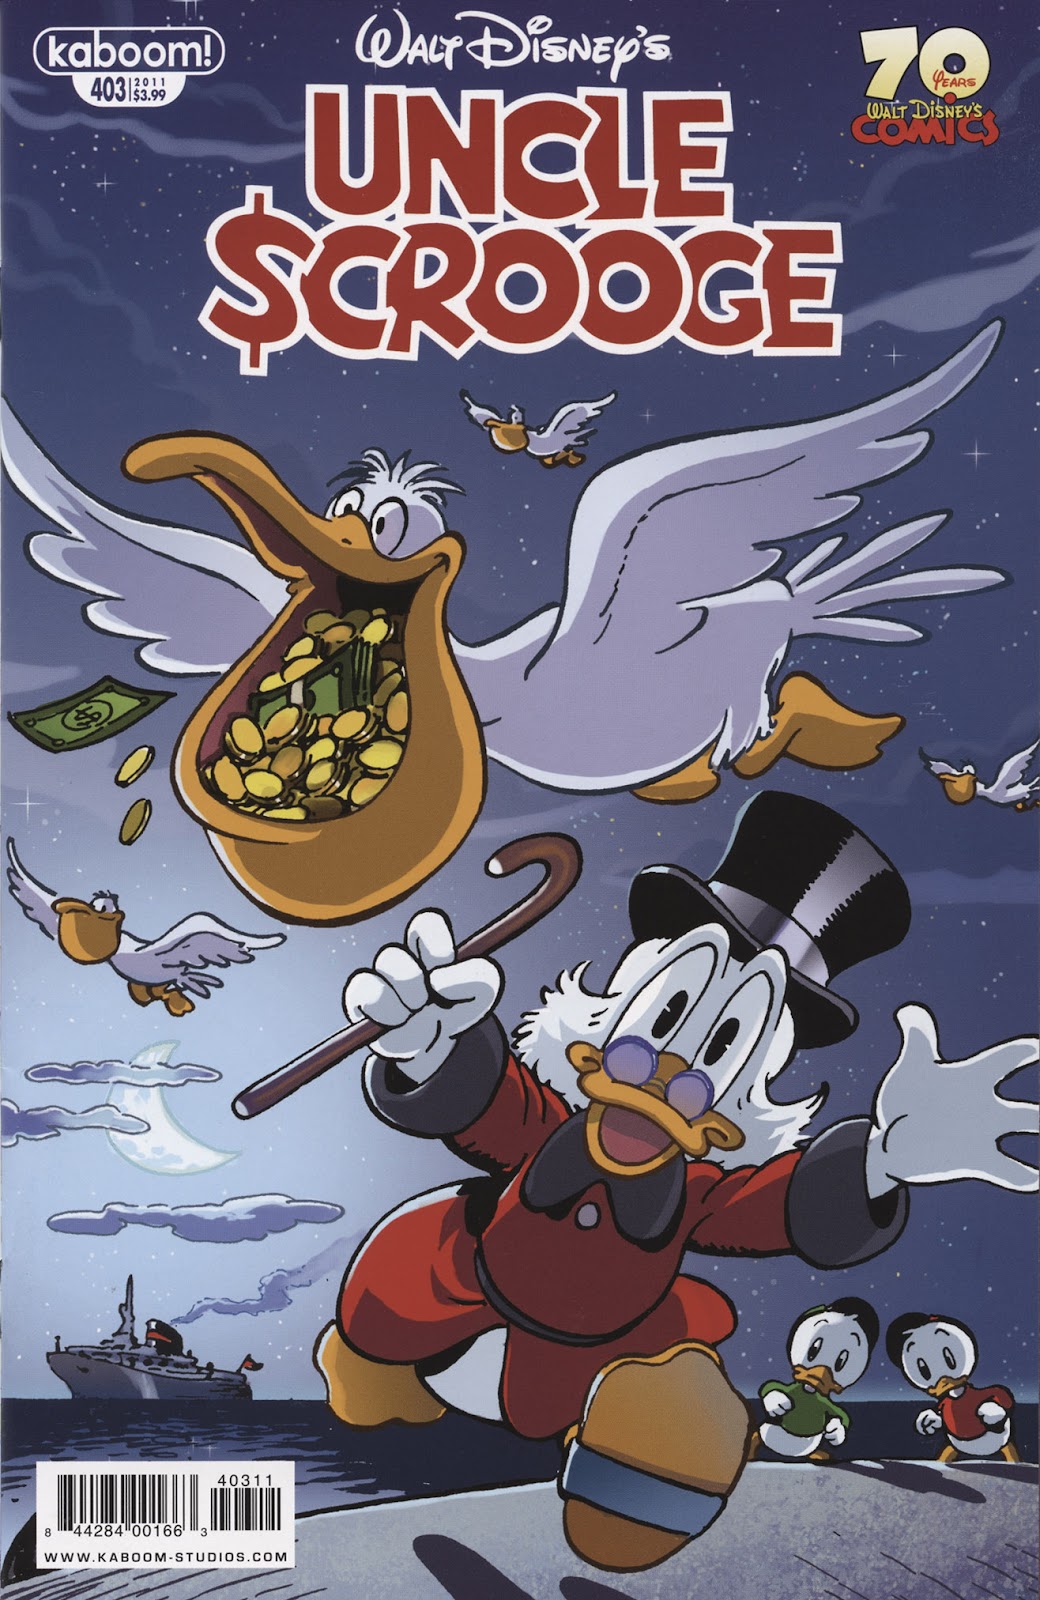 Uncle Scrooge (1953) issue 403 - Page 1